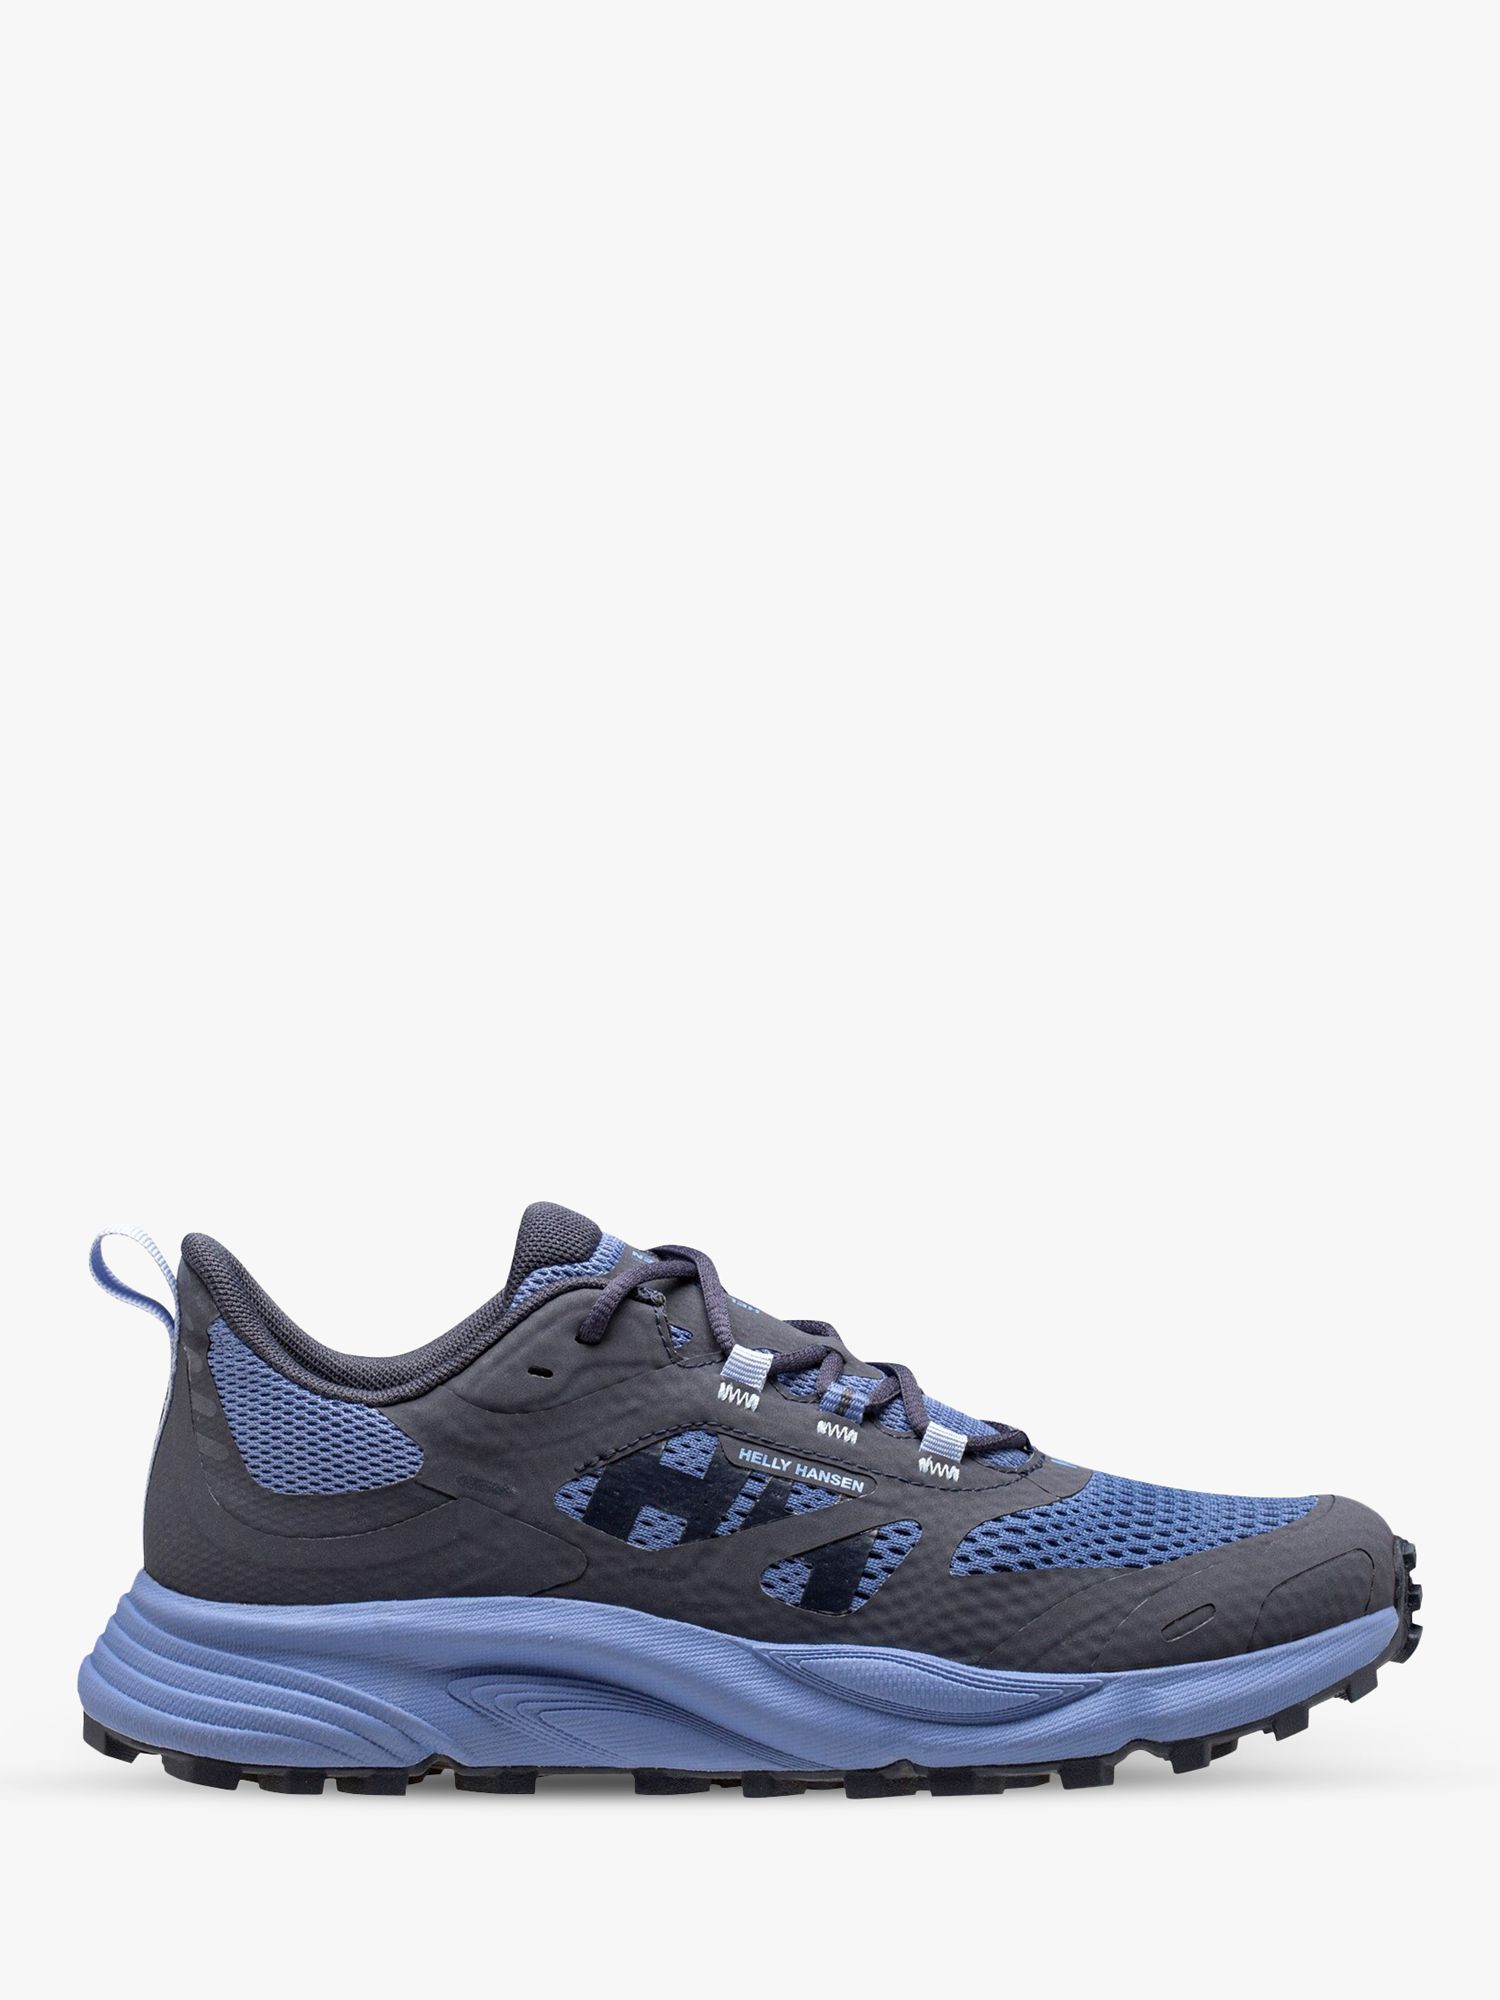 Helly Hansen Trail Wizard Running Shoes, Blue at John Lewis & Partners